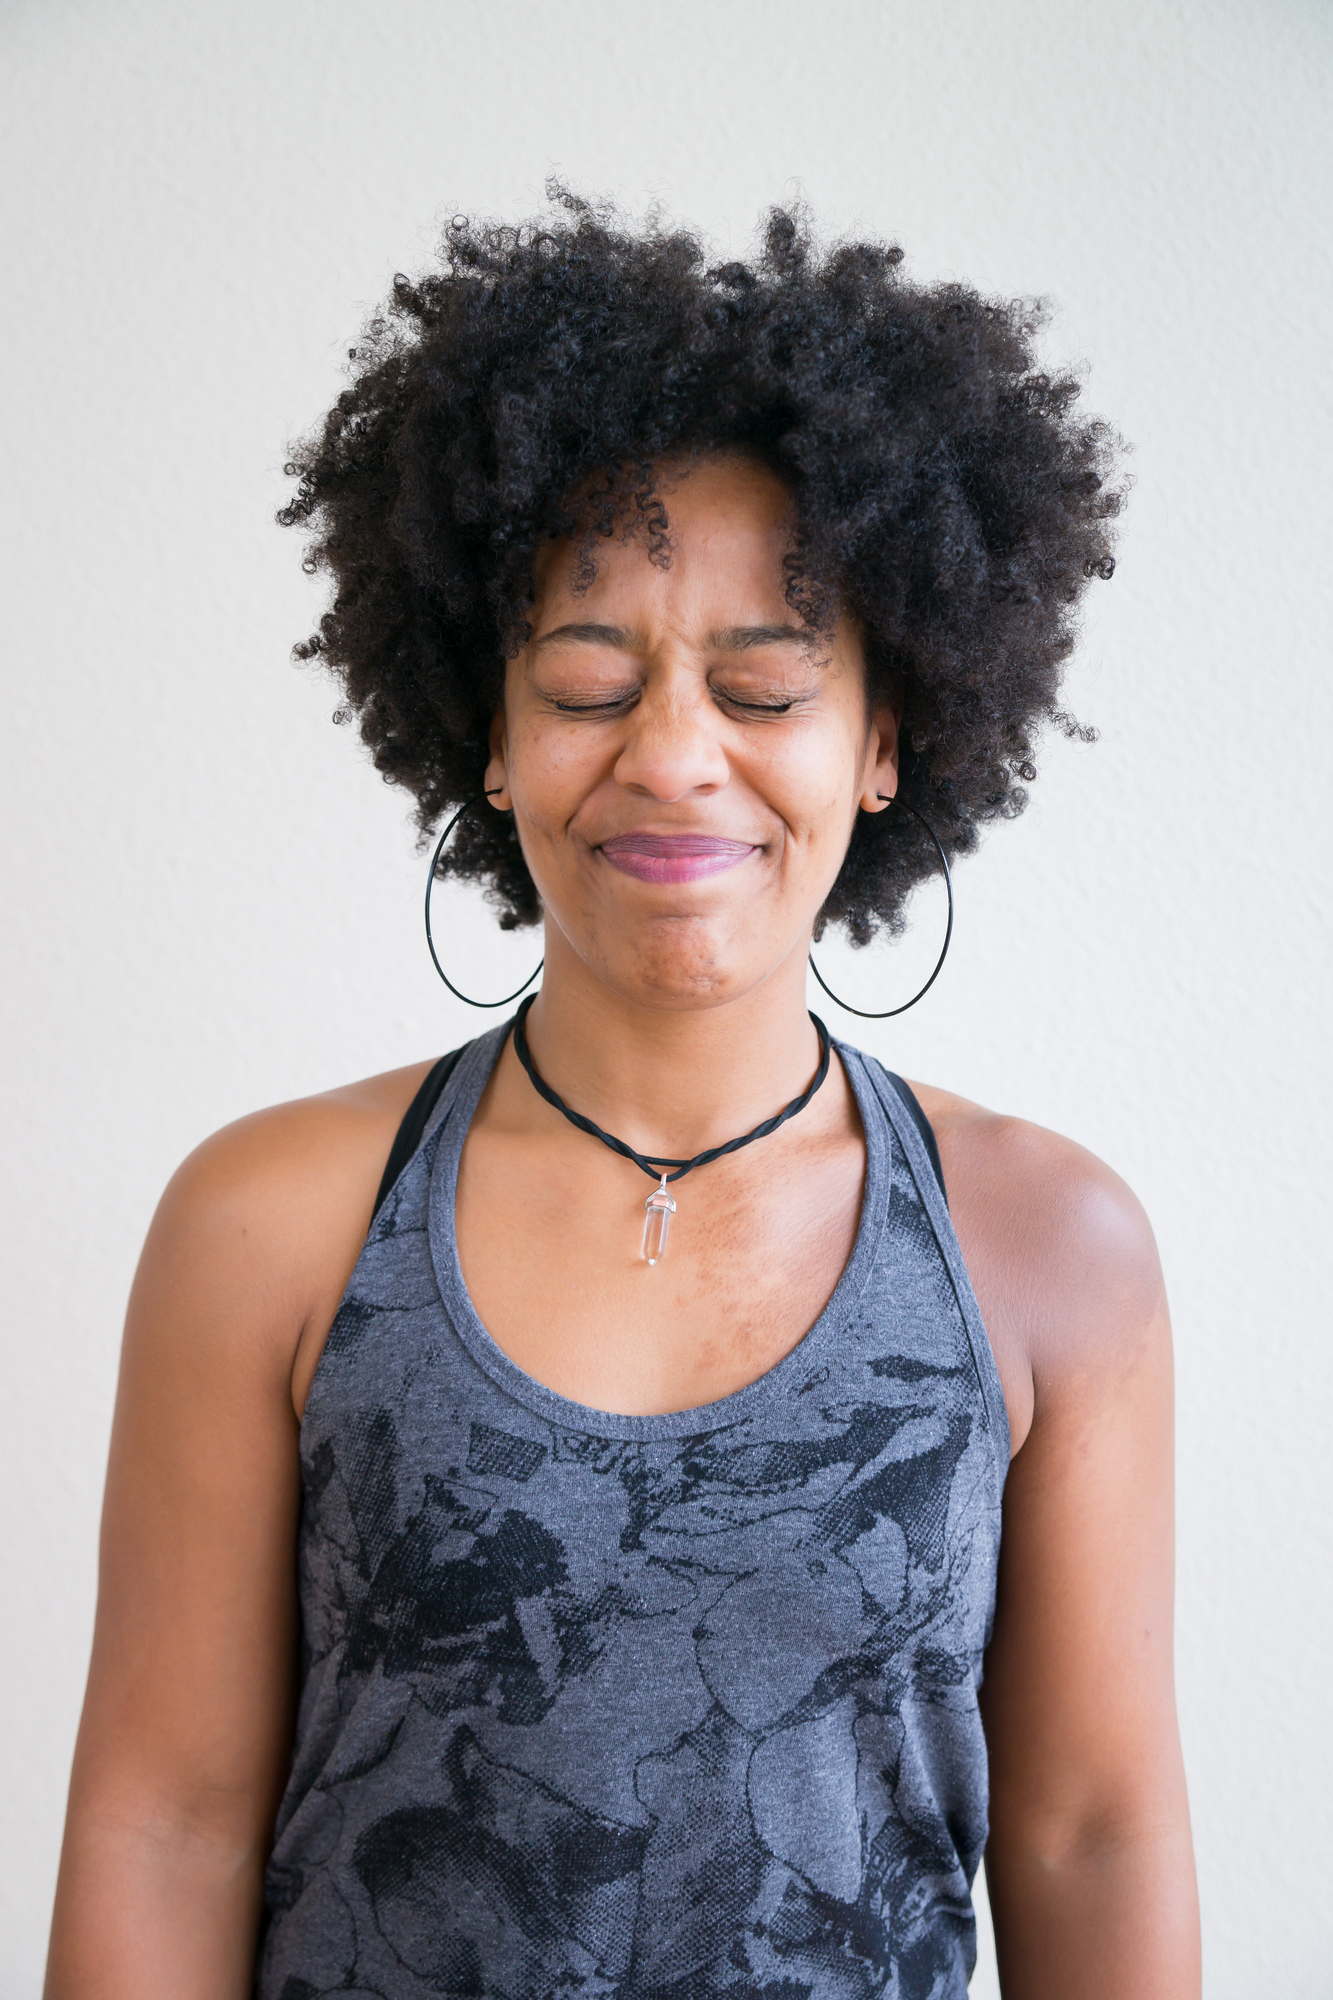 A Black woman closes her eyes with a frustrated expression